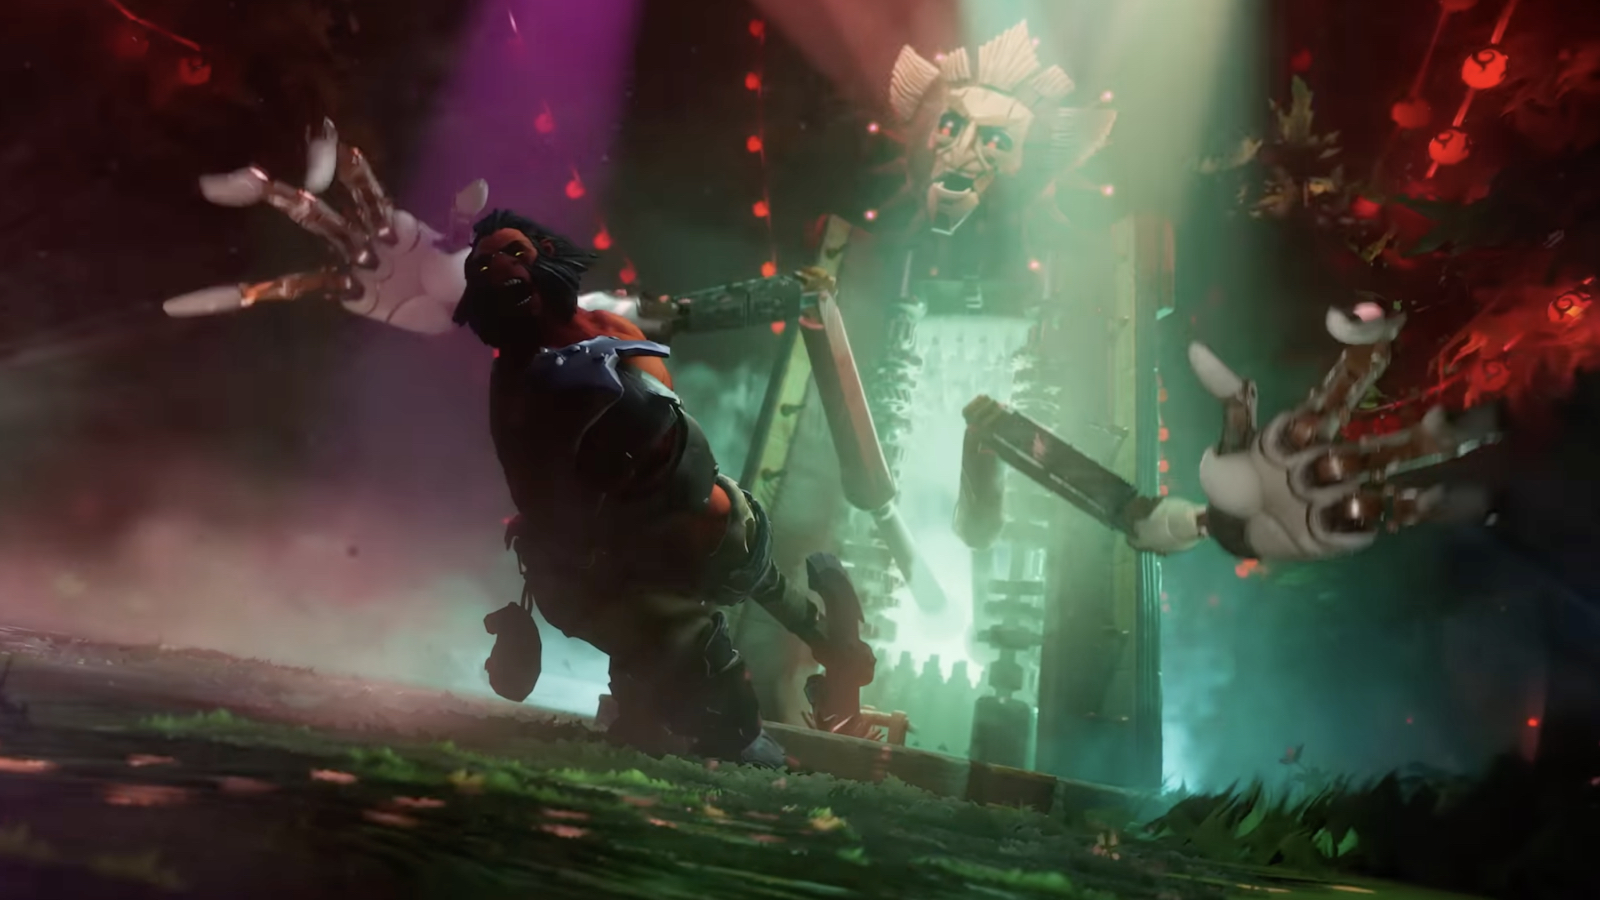 The Puppet Master: Everything you need to know about Dota 2's